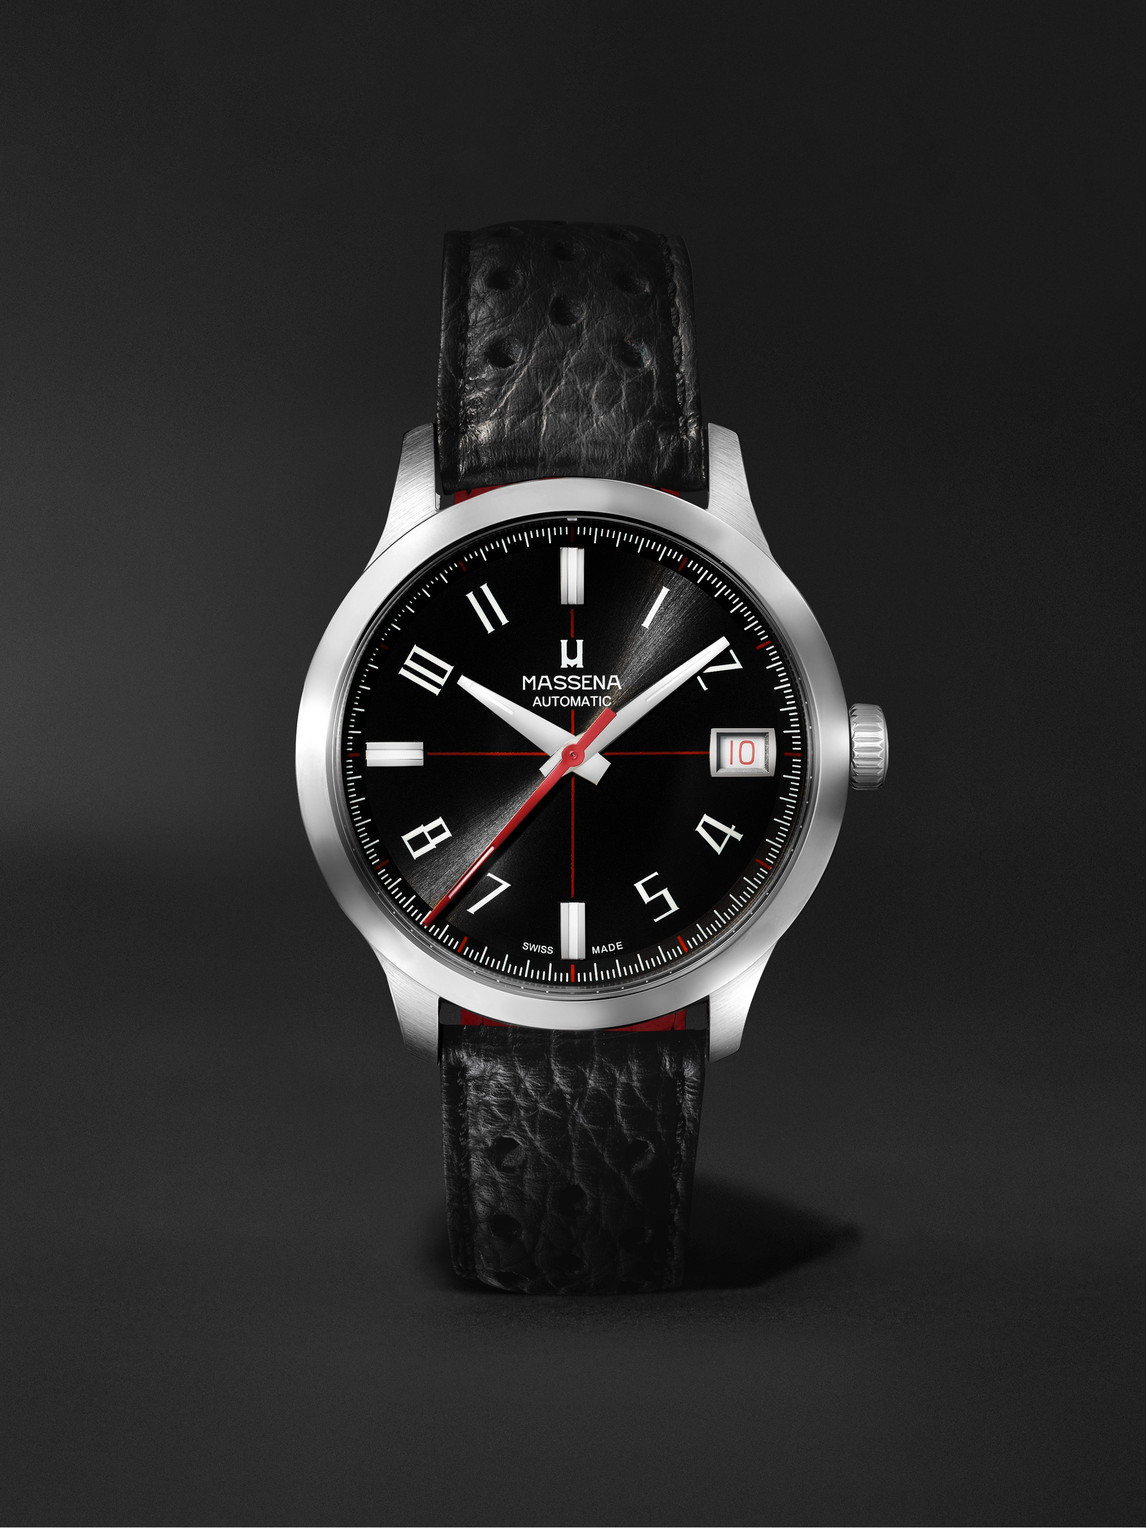 Dato-Racer Limited Edition Automatic 40mm Stainless Steel and Full-Grain Leather Watch, Ref. No. DR-001